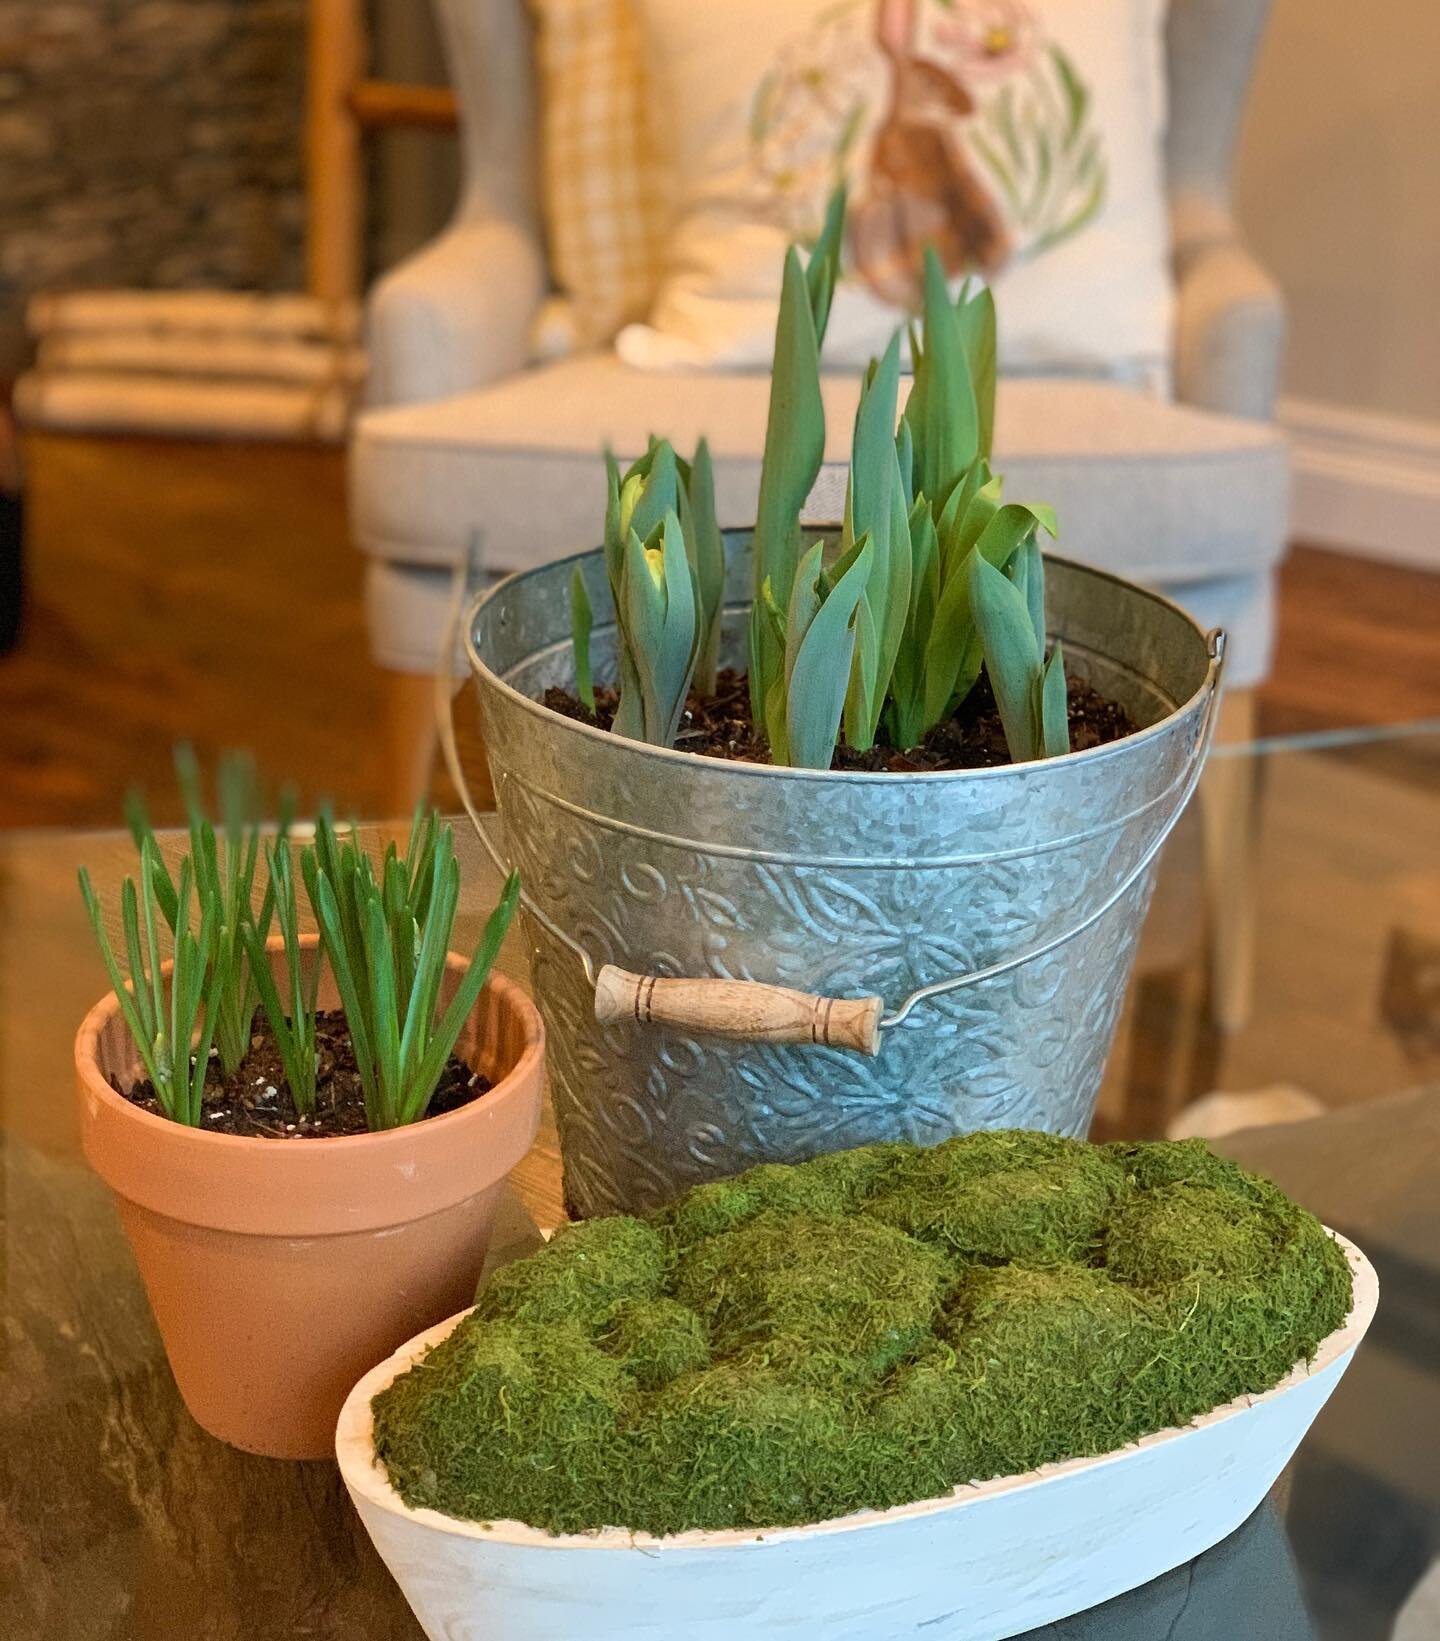 🤍🤍 It&rsquo;s almost spring and I couldn&rsquo;t be happier. These bulbs were saved from the winter storm and will be blooming soon!
&bull;
Come join us to meet new friends &amp; discover beautiful homes, floor plans, and decor. I know you&rsquo;ll